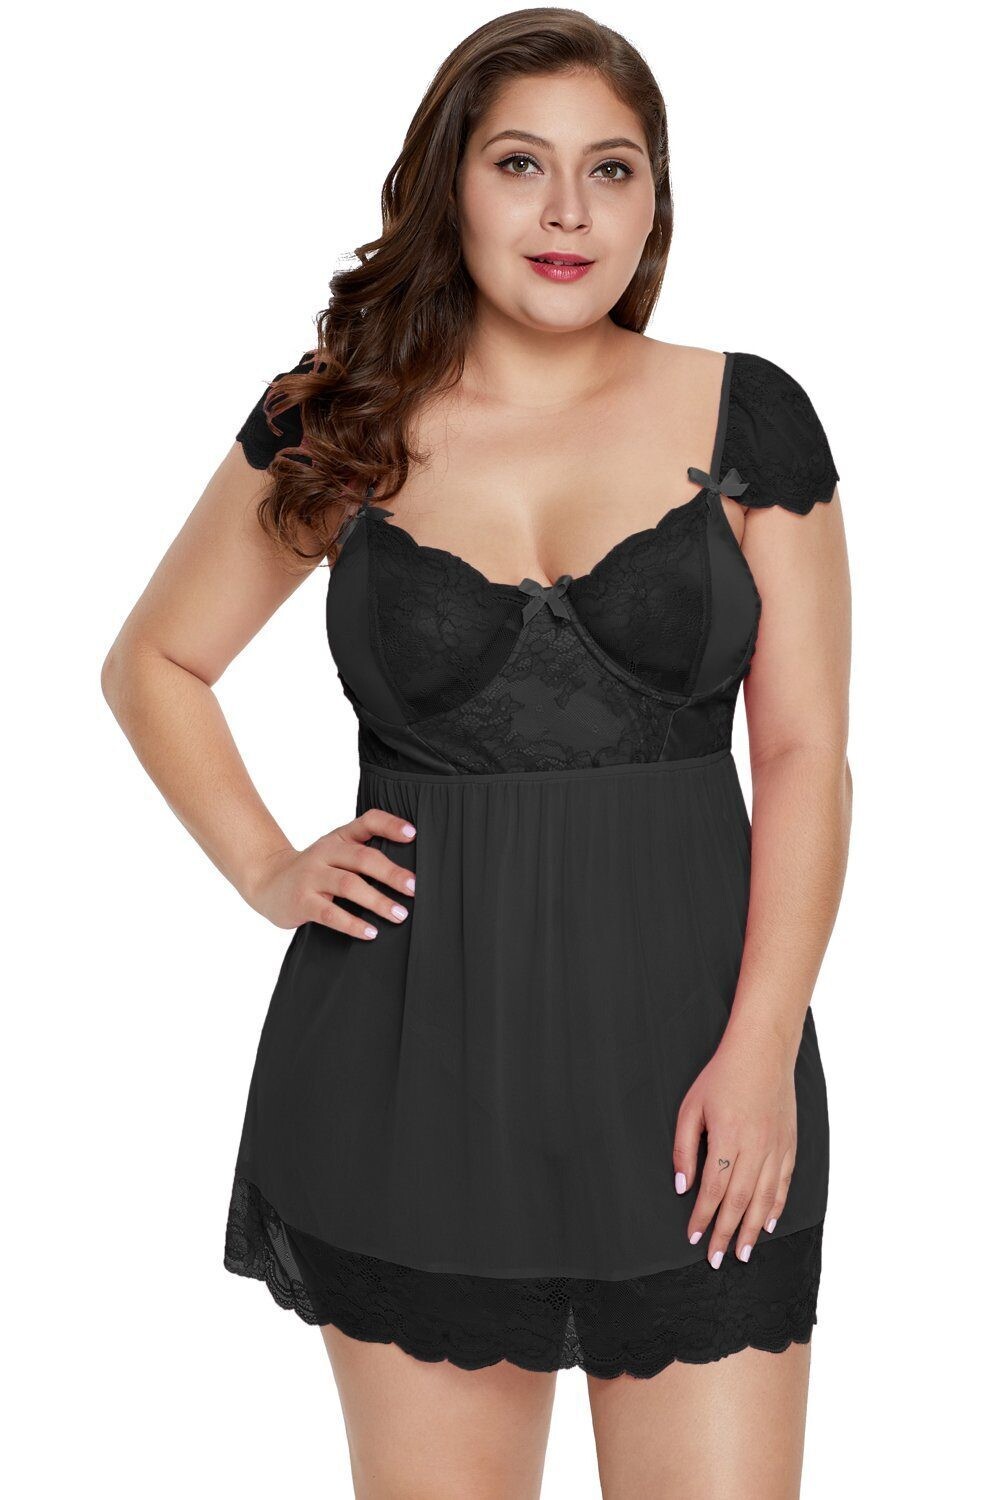 Plus Size Mesh and Lace Babydoll Set